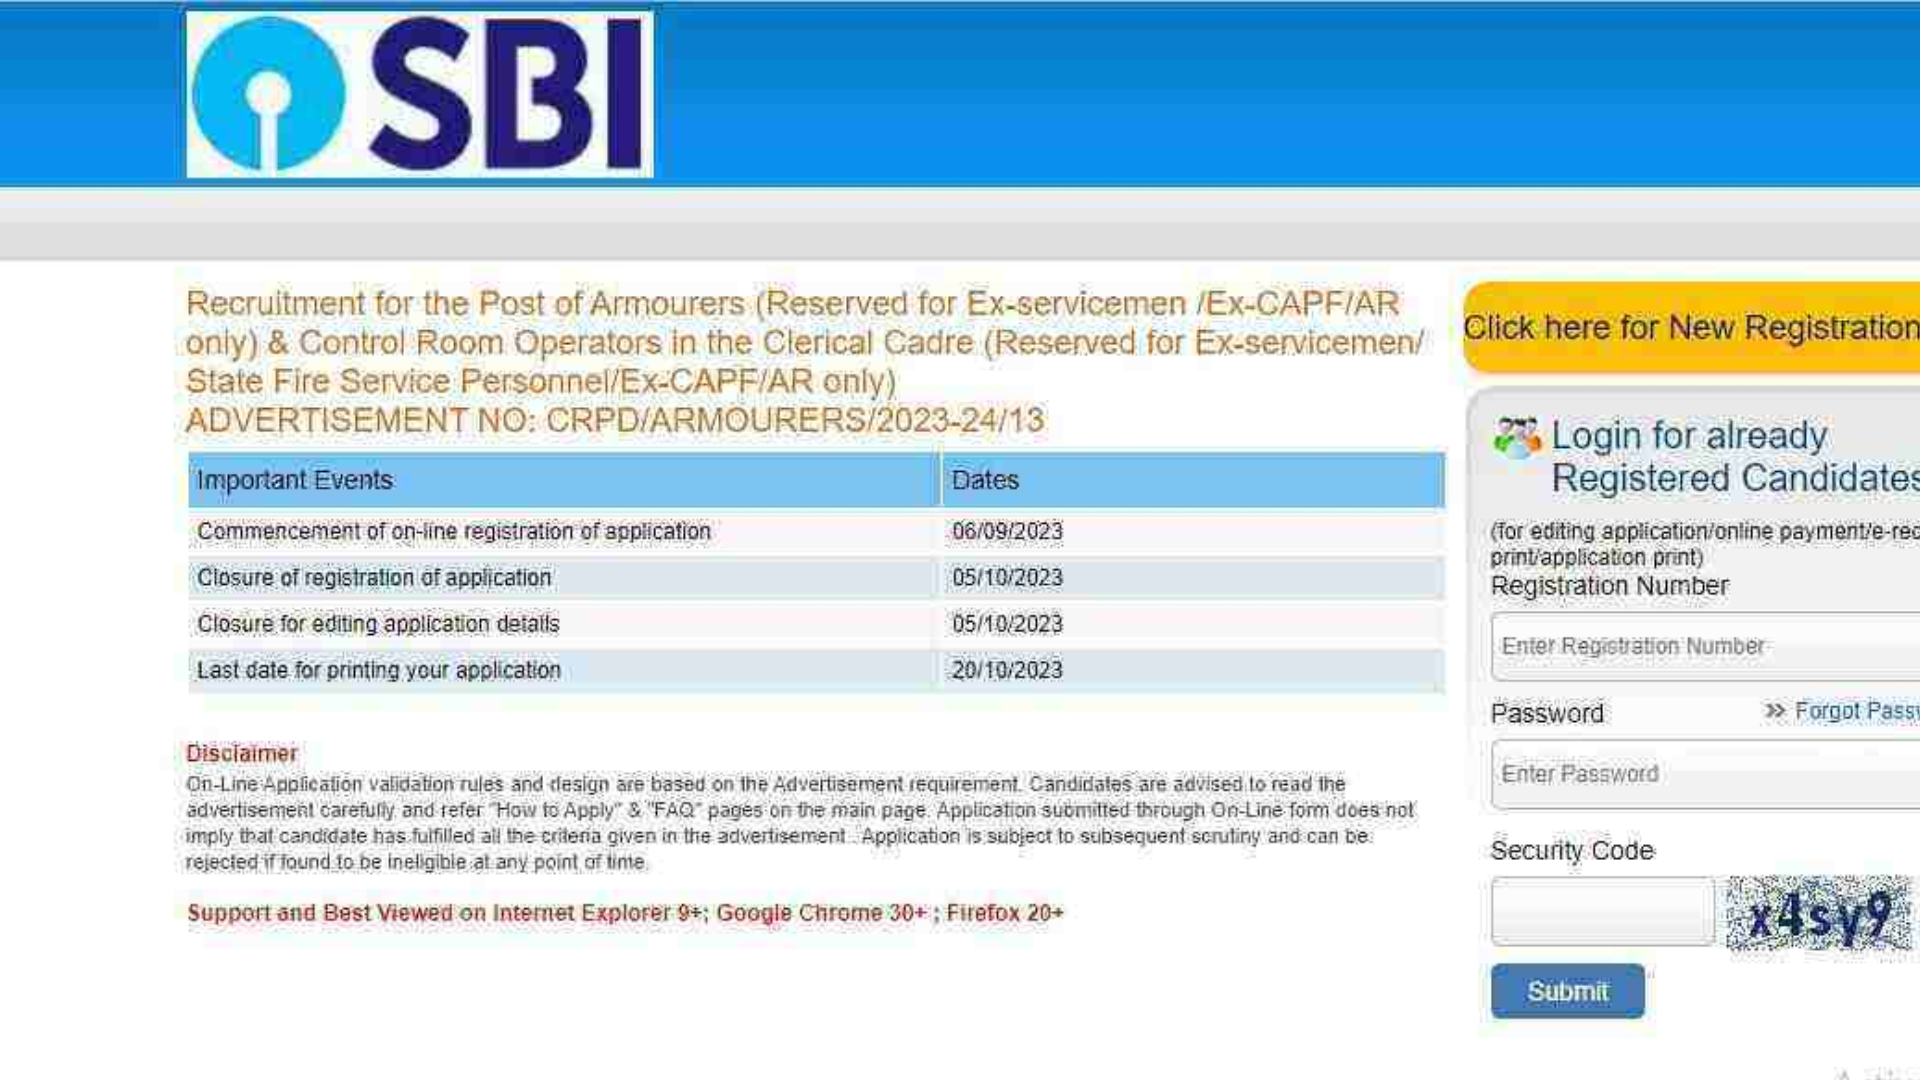 SBI Armourers and Control Room Operators Admit Card 2023 Download for Written Exam